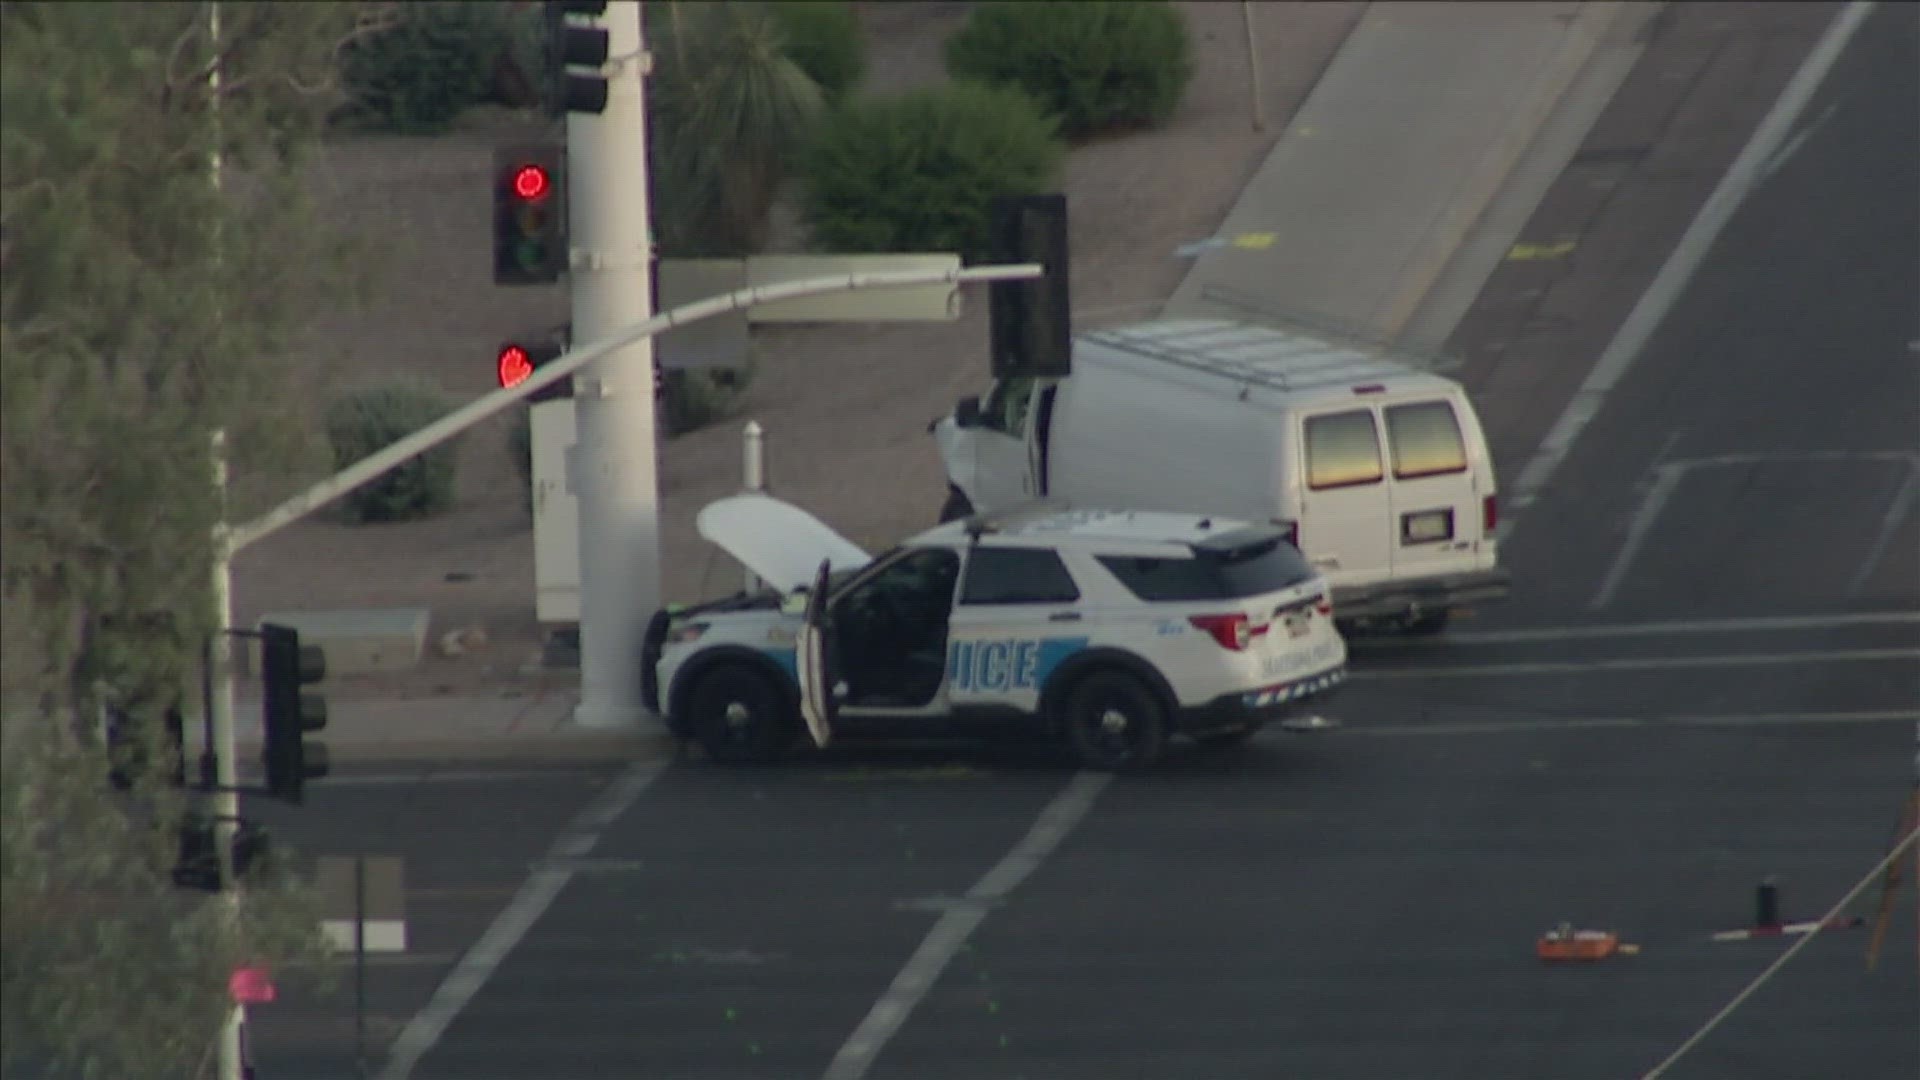 The crash involved a vehicle driven Scottsdale police officer and another vehicle, according to the Scottsdale Police Department.